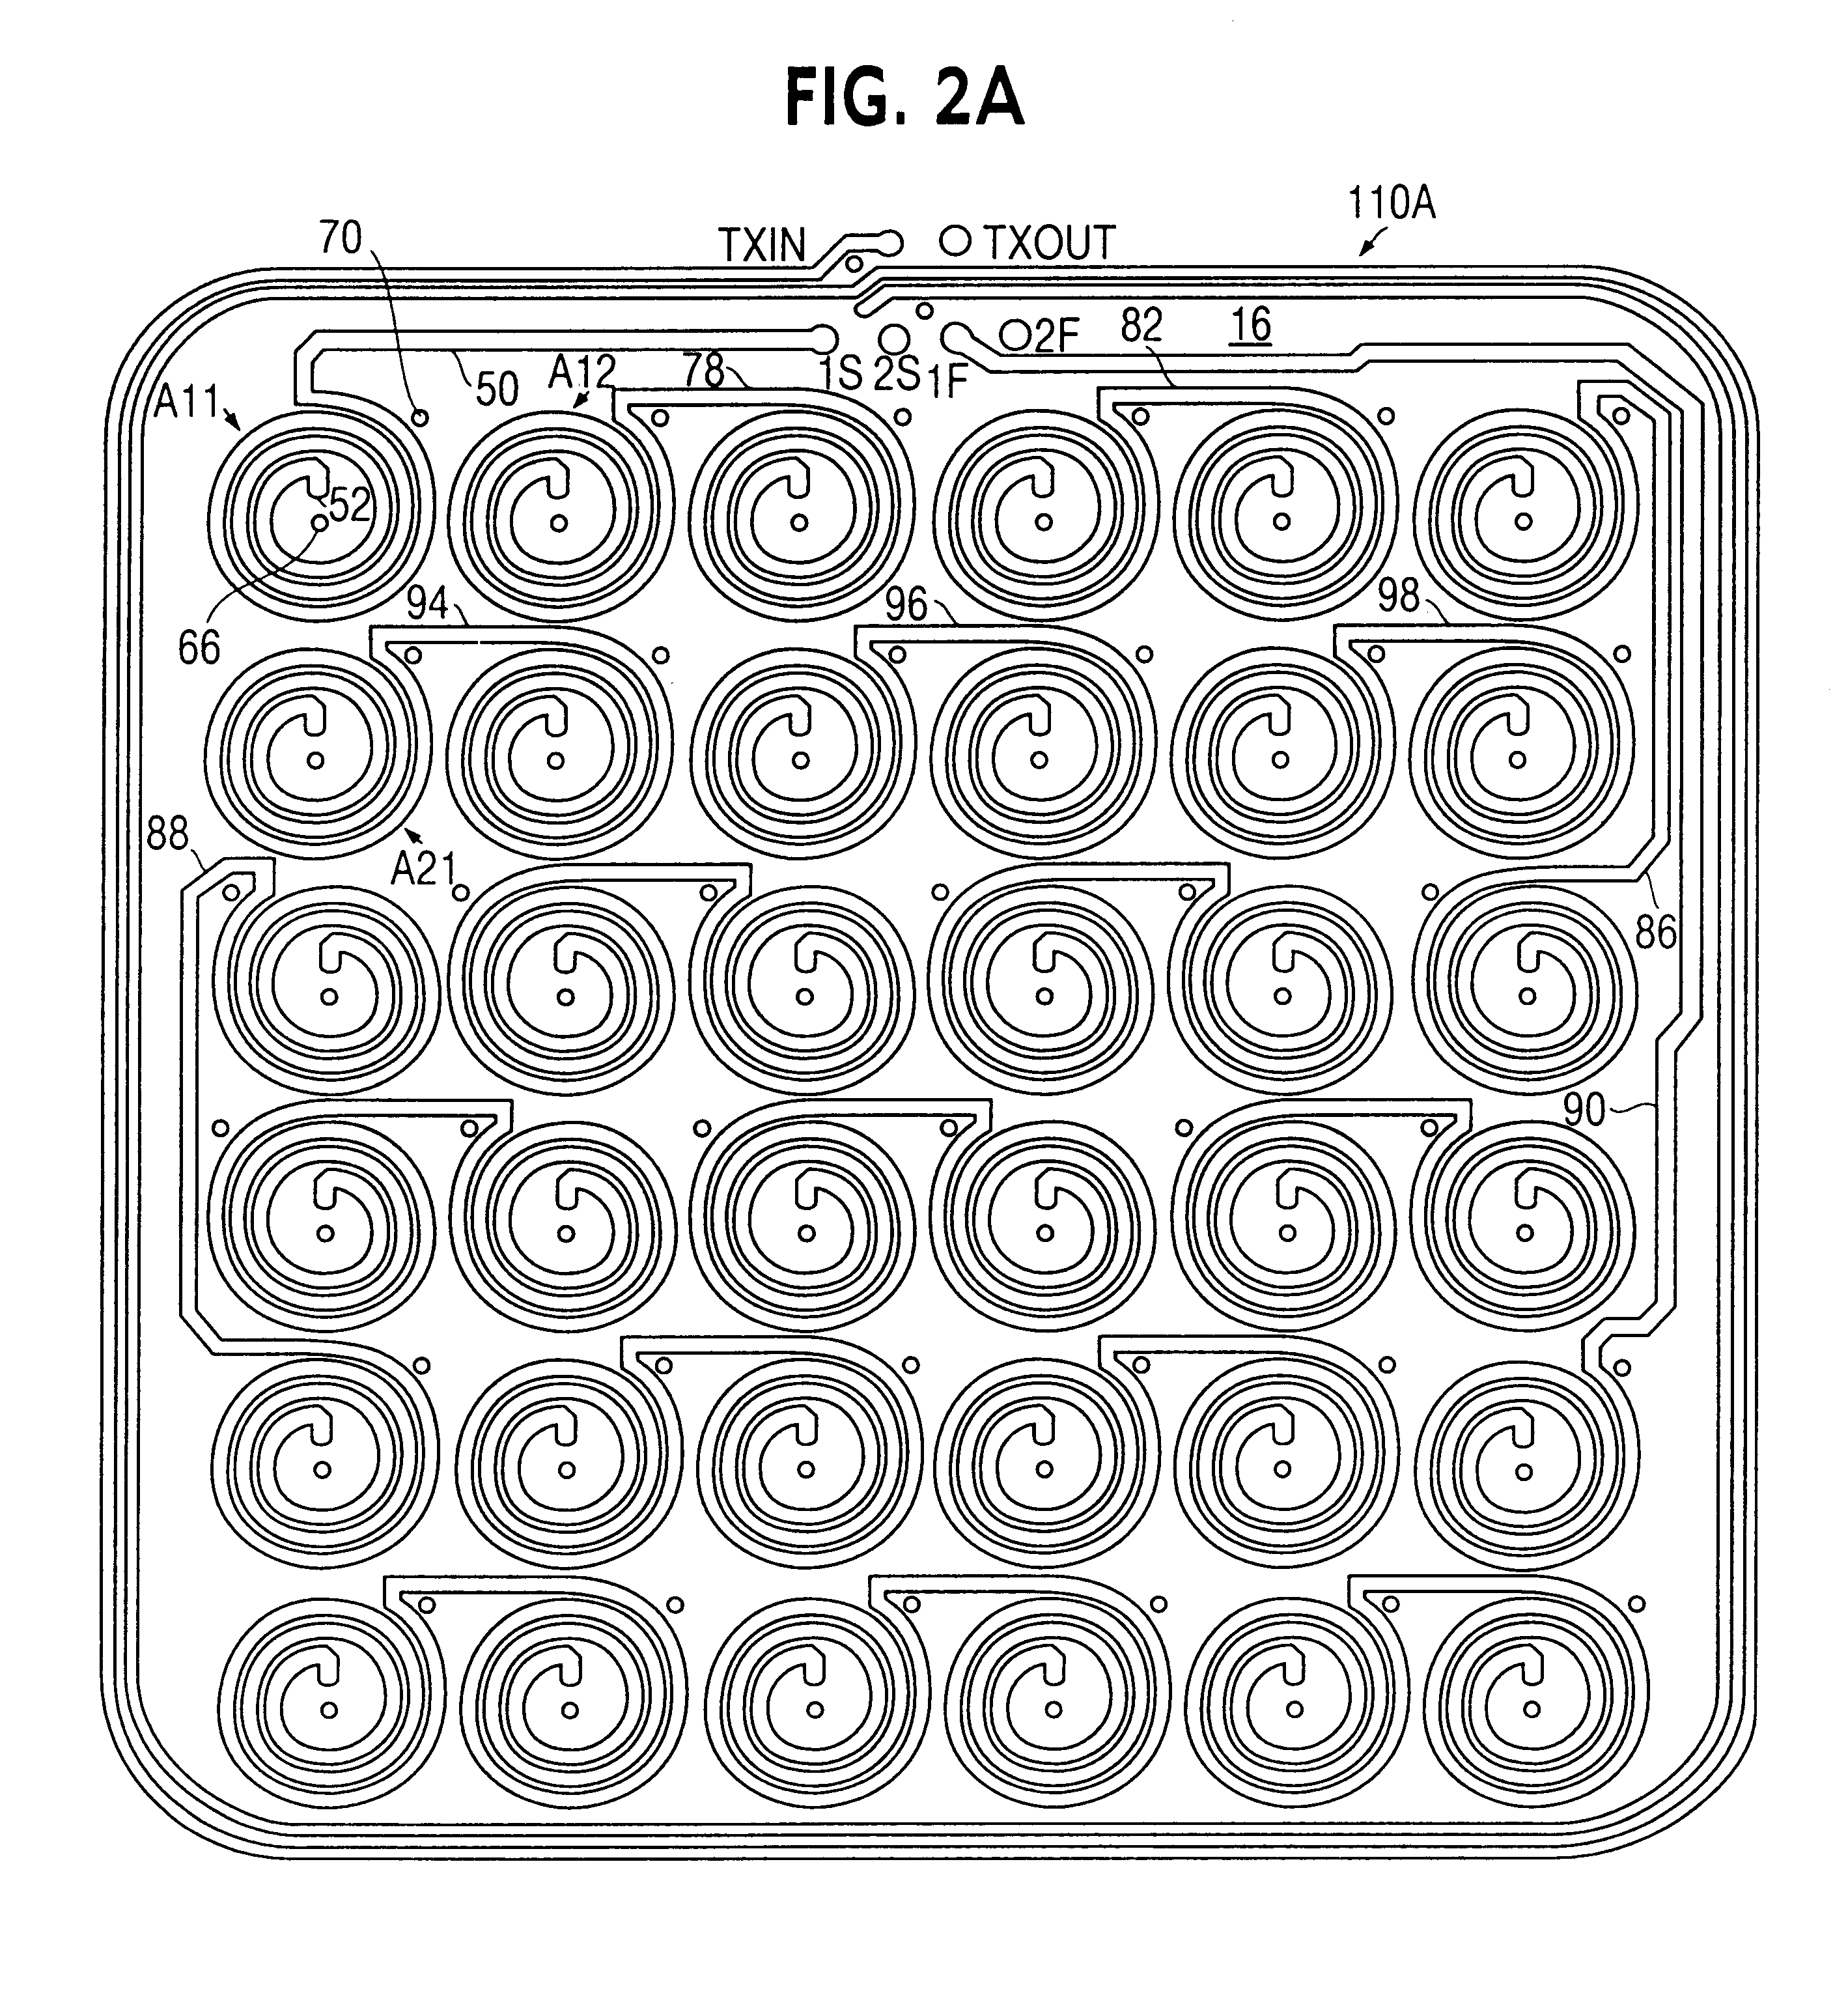 Coil driving circuit for EAS marker deactivation device